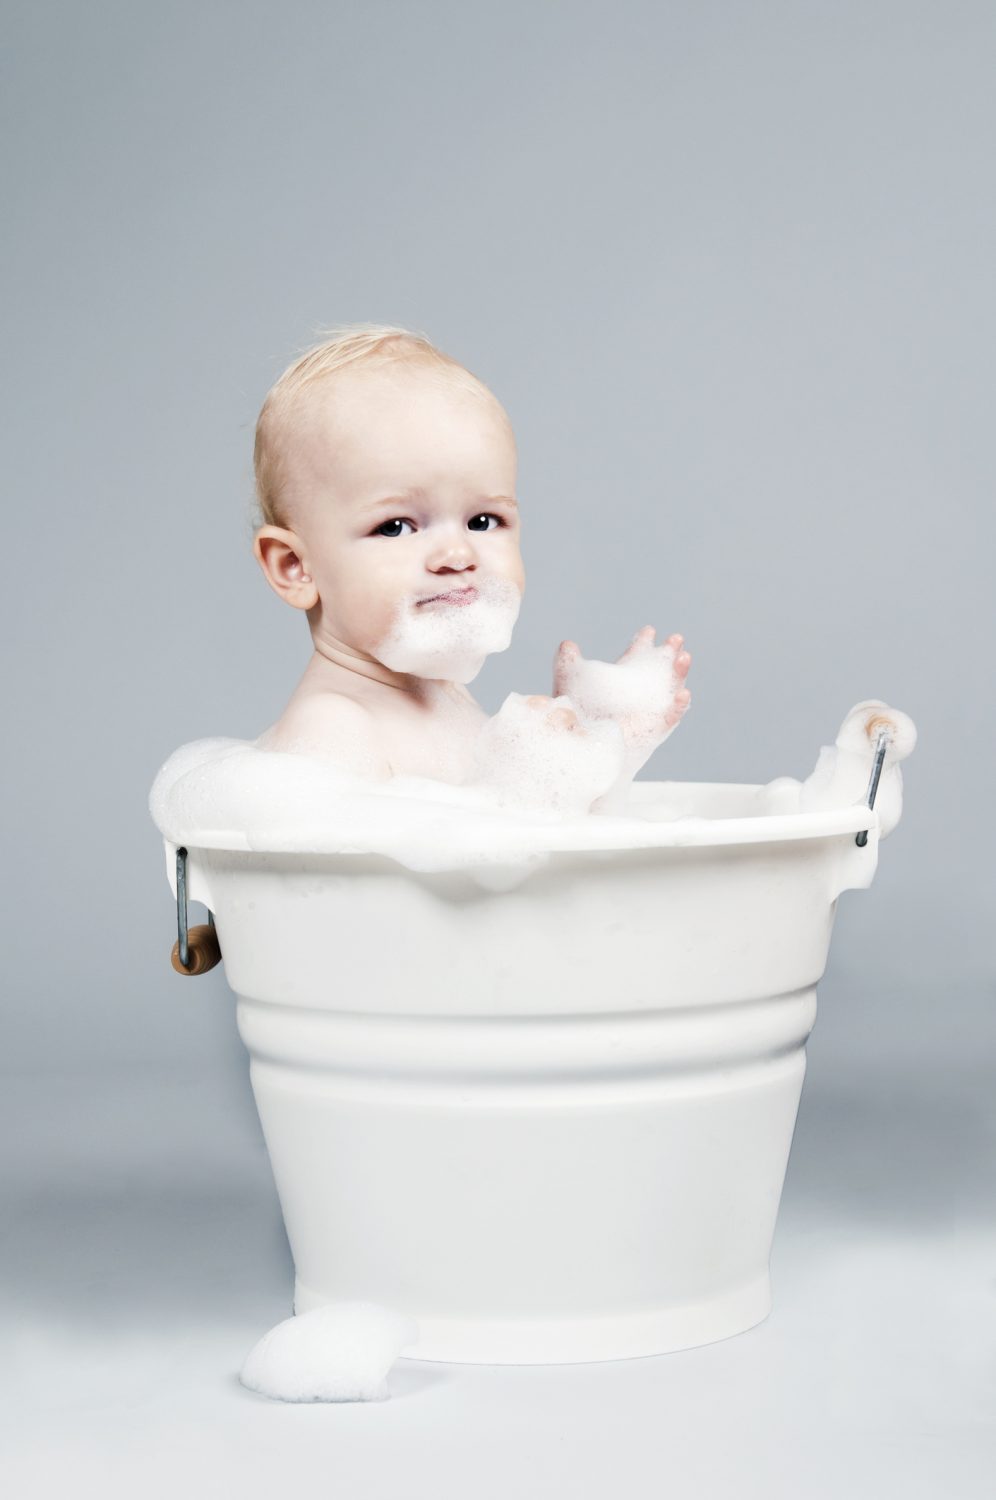 Let’s Not Throw the Baby Out With the Bathwater!